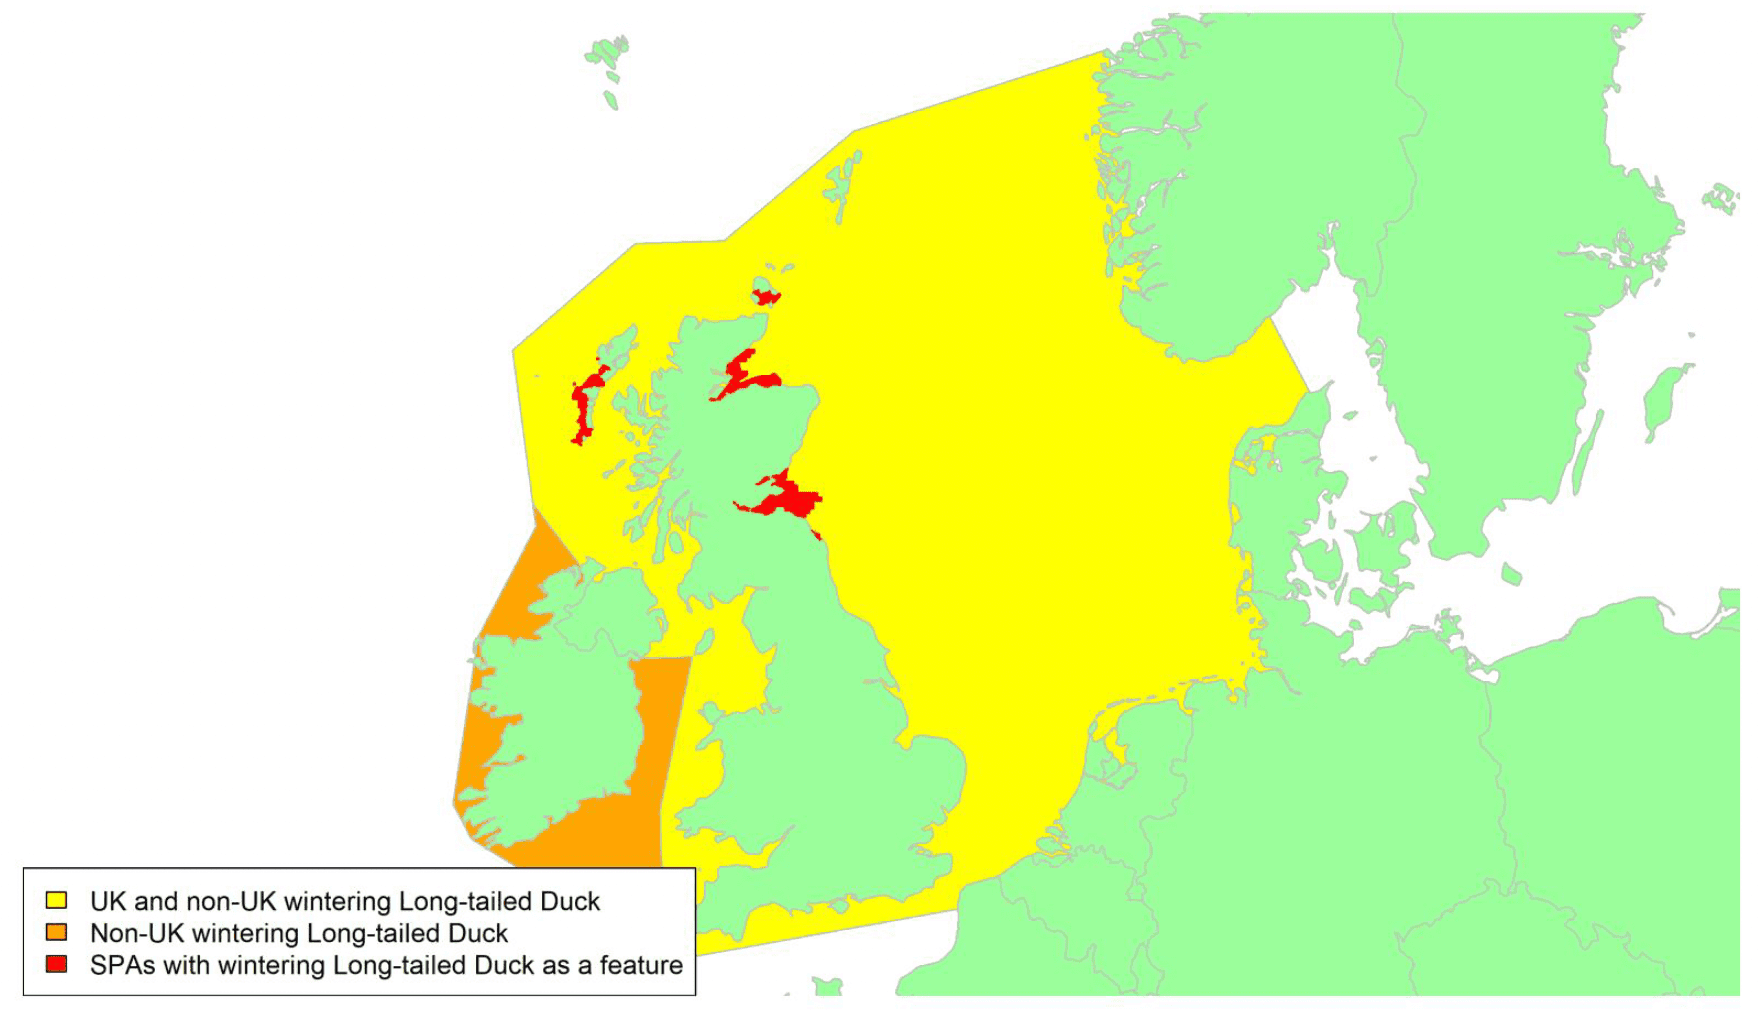 Map of North West Europe showing migratory routes and SPAs within the UK for Long-tailed Duck as described in the text below.